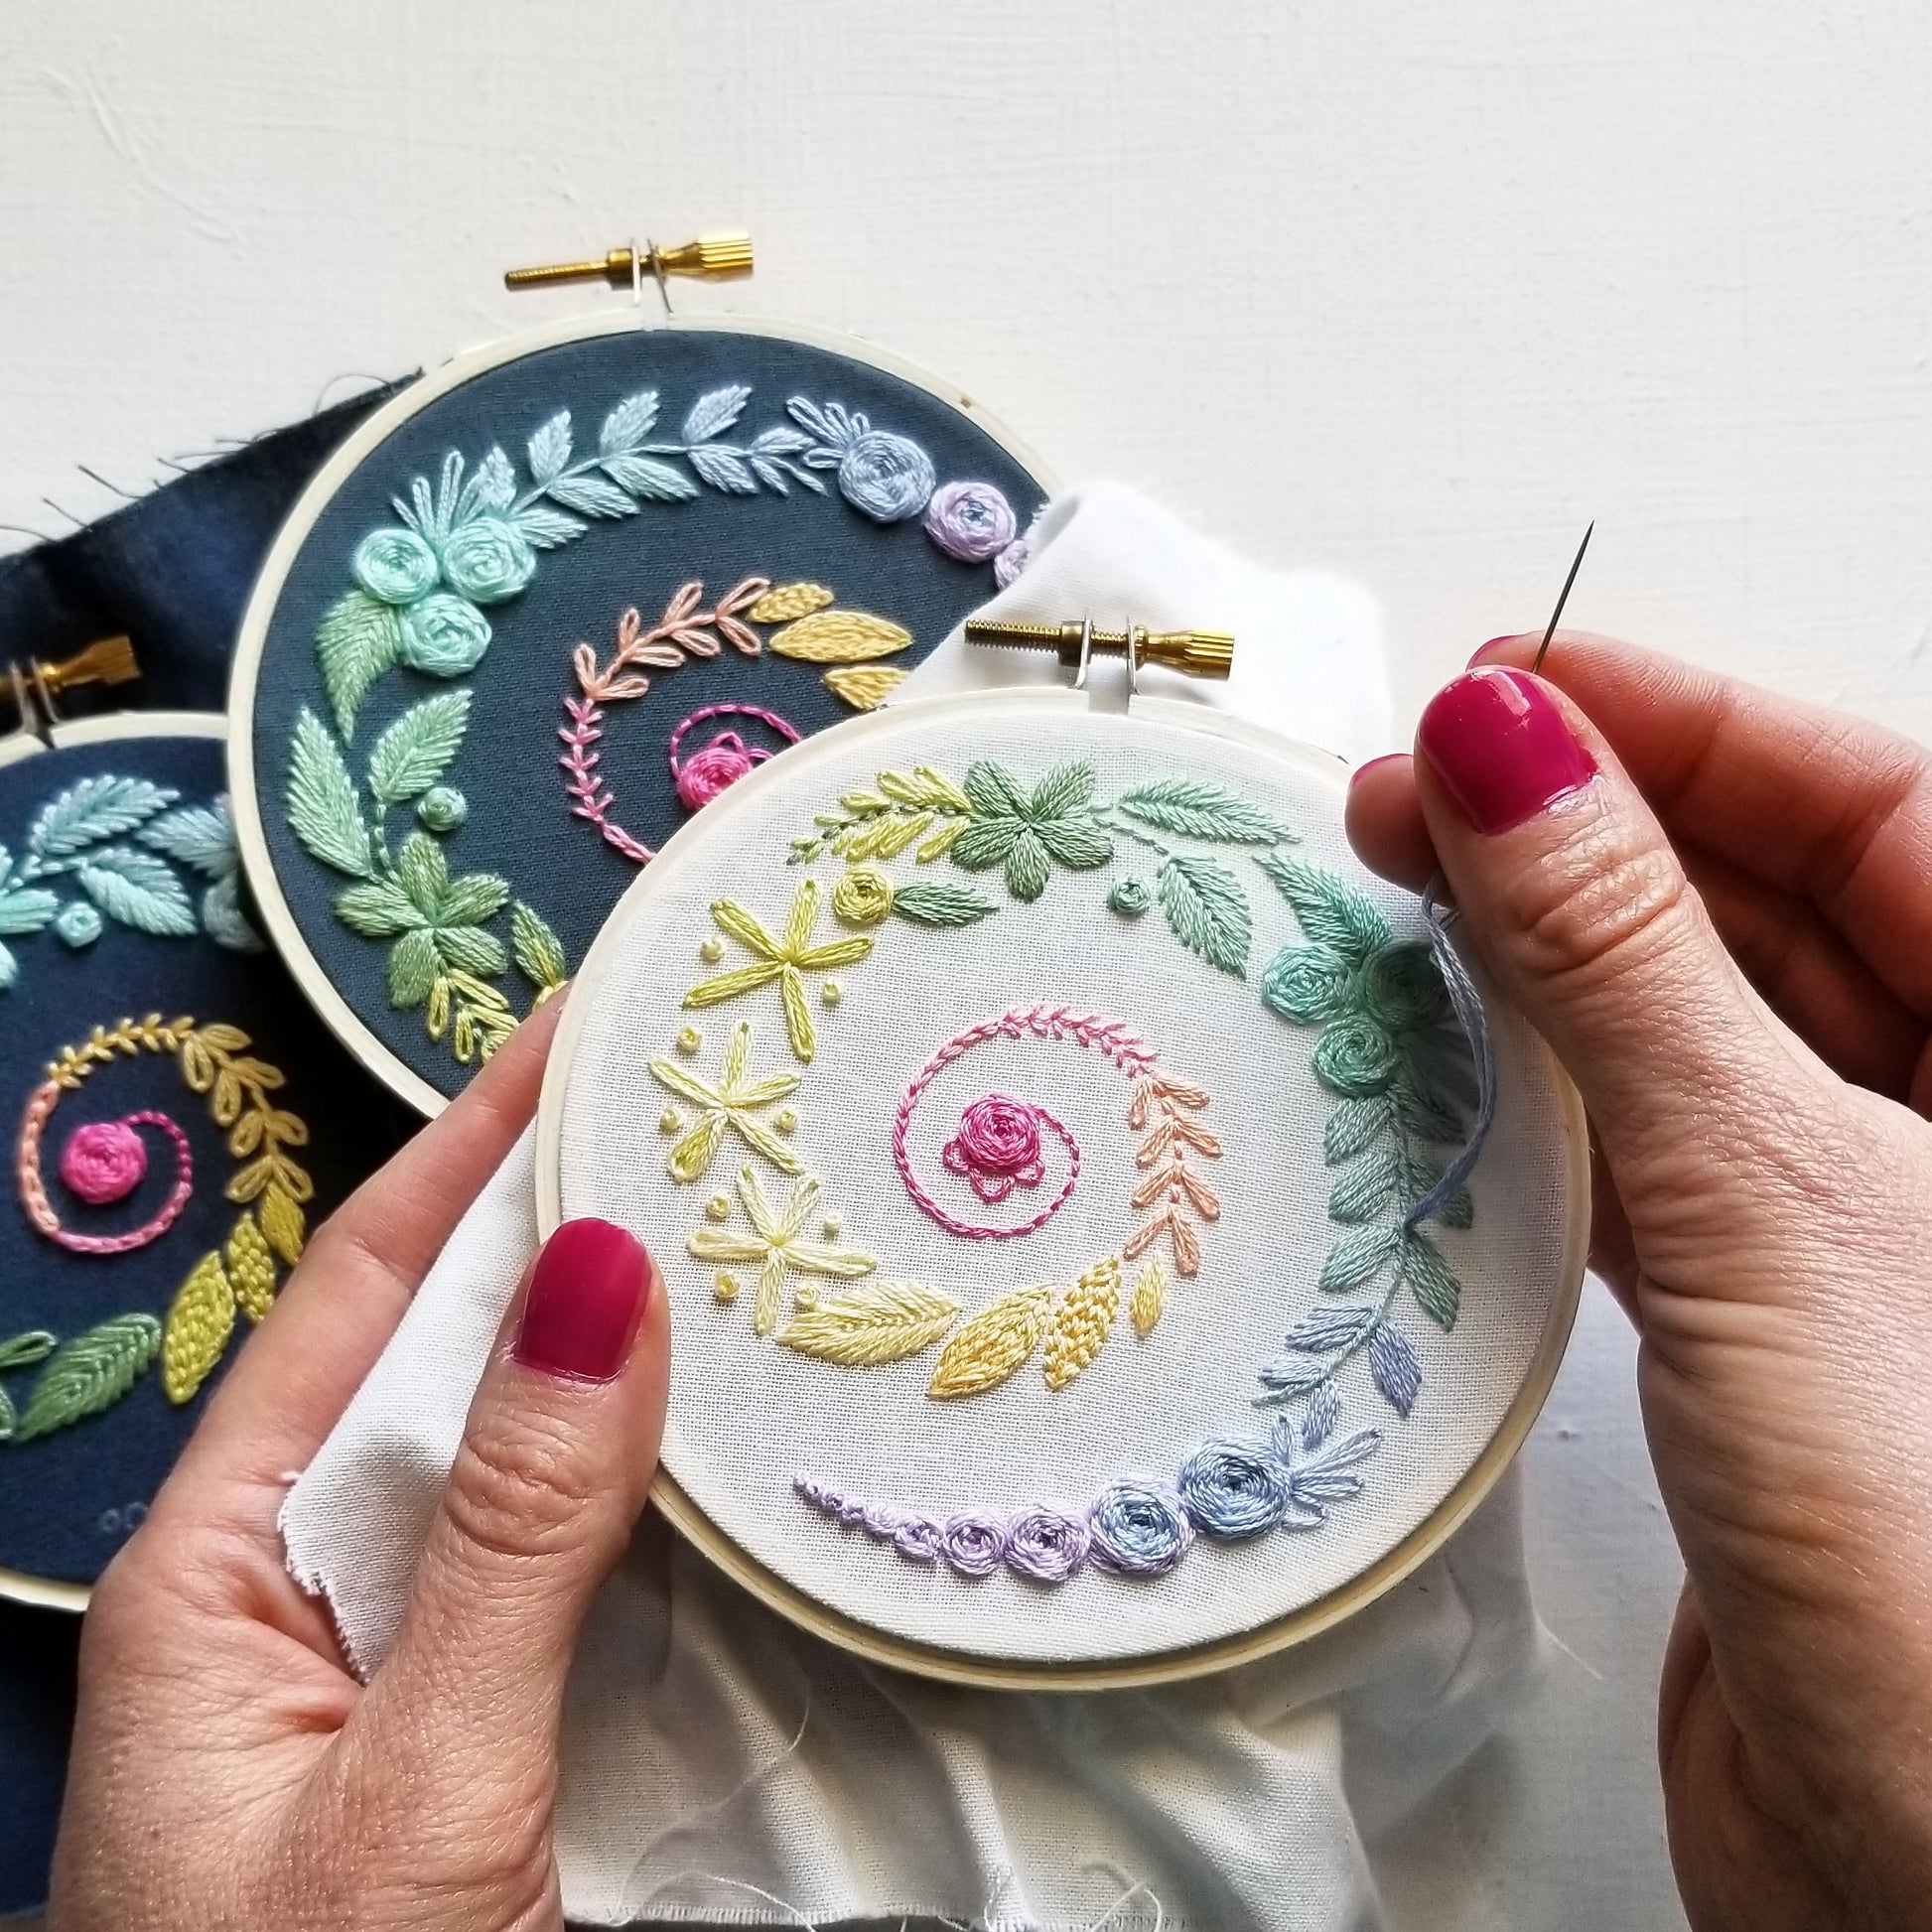 75 Modern Embroidery Kits for Beginners - Cleverpedia